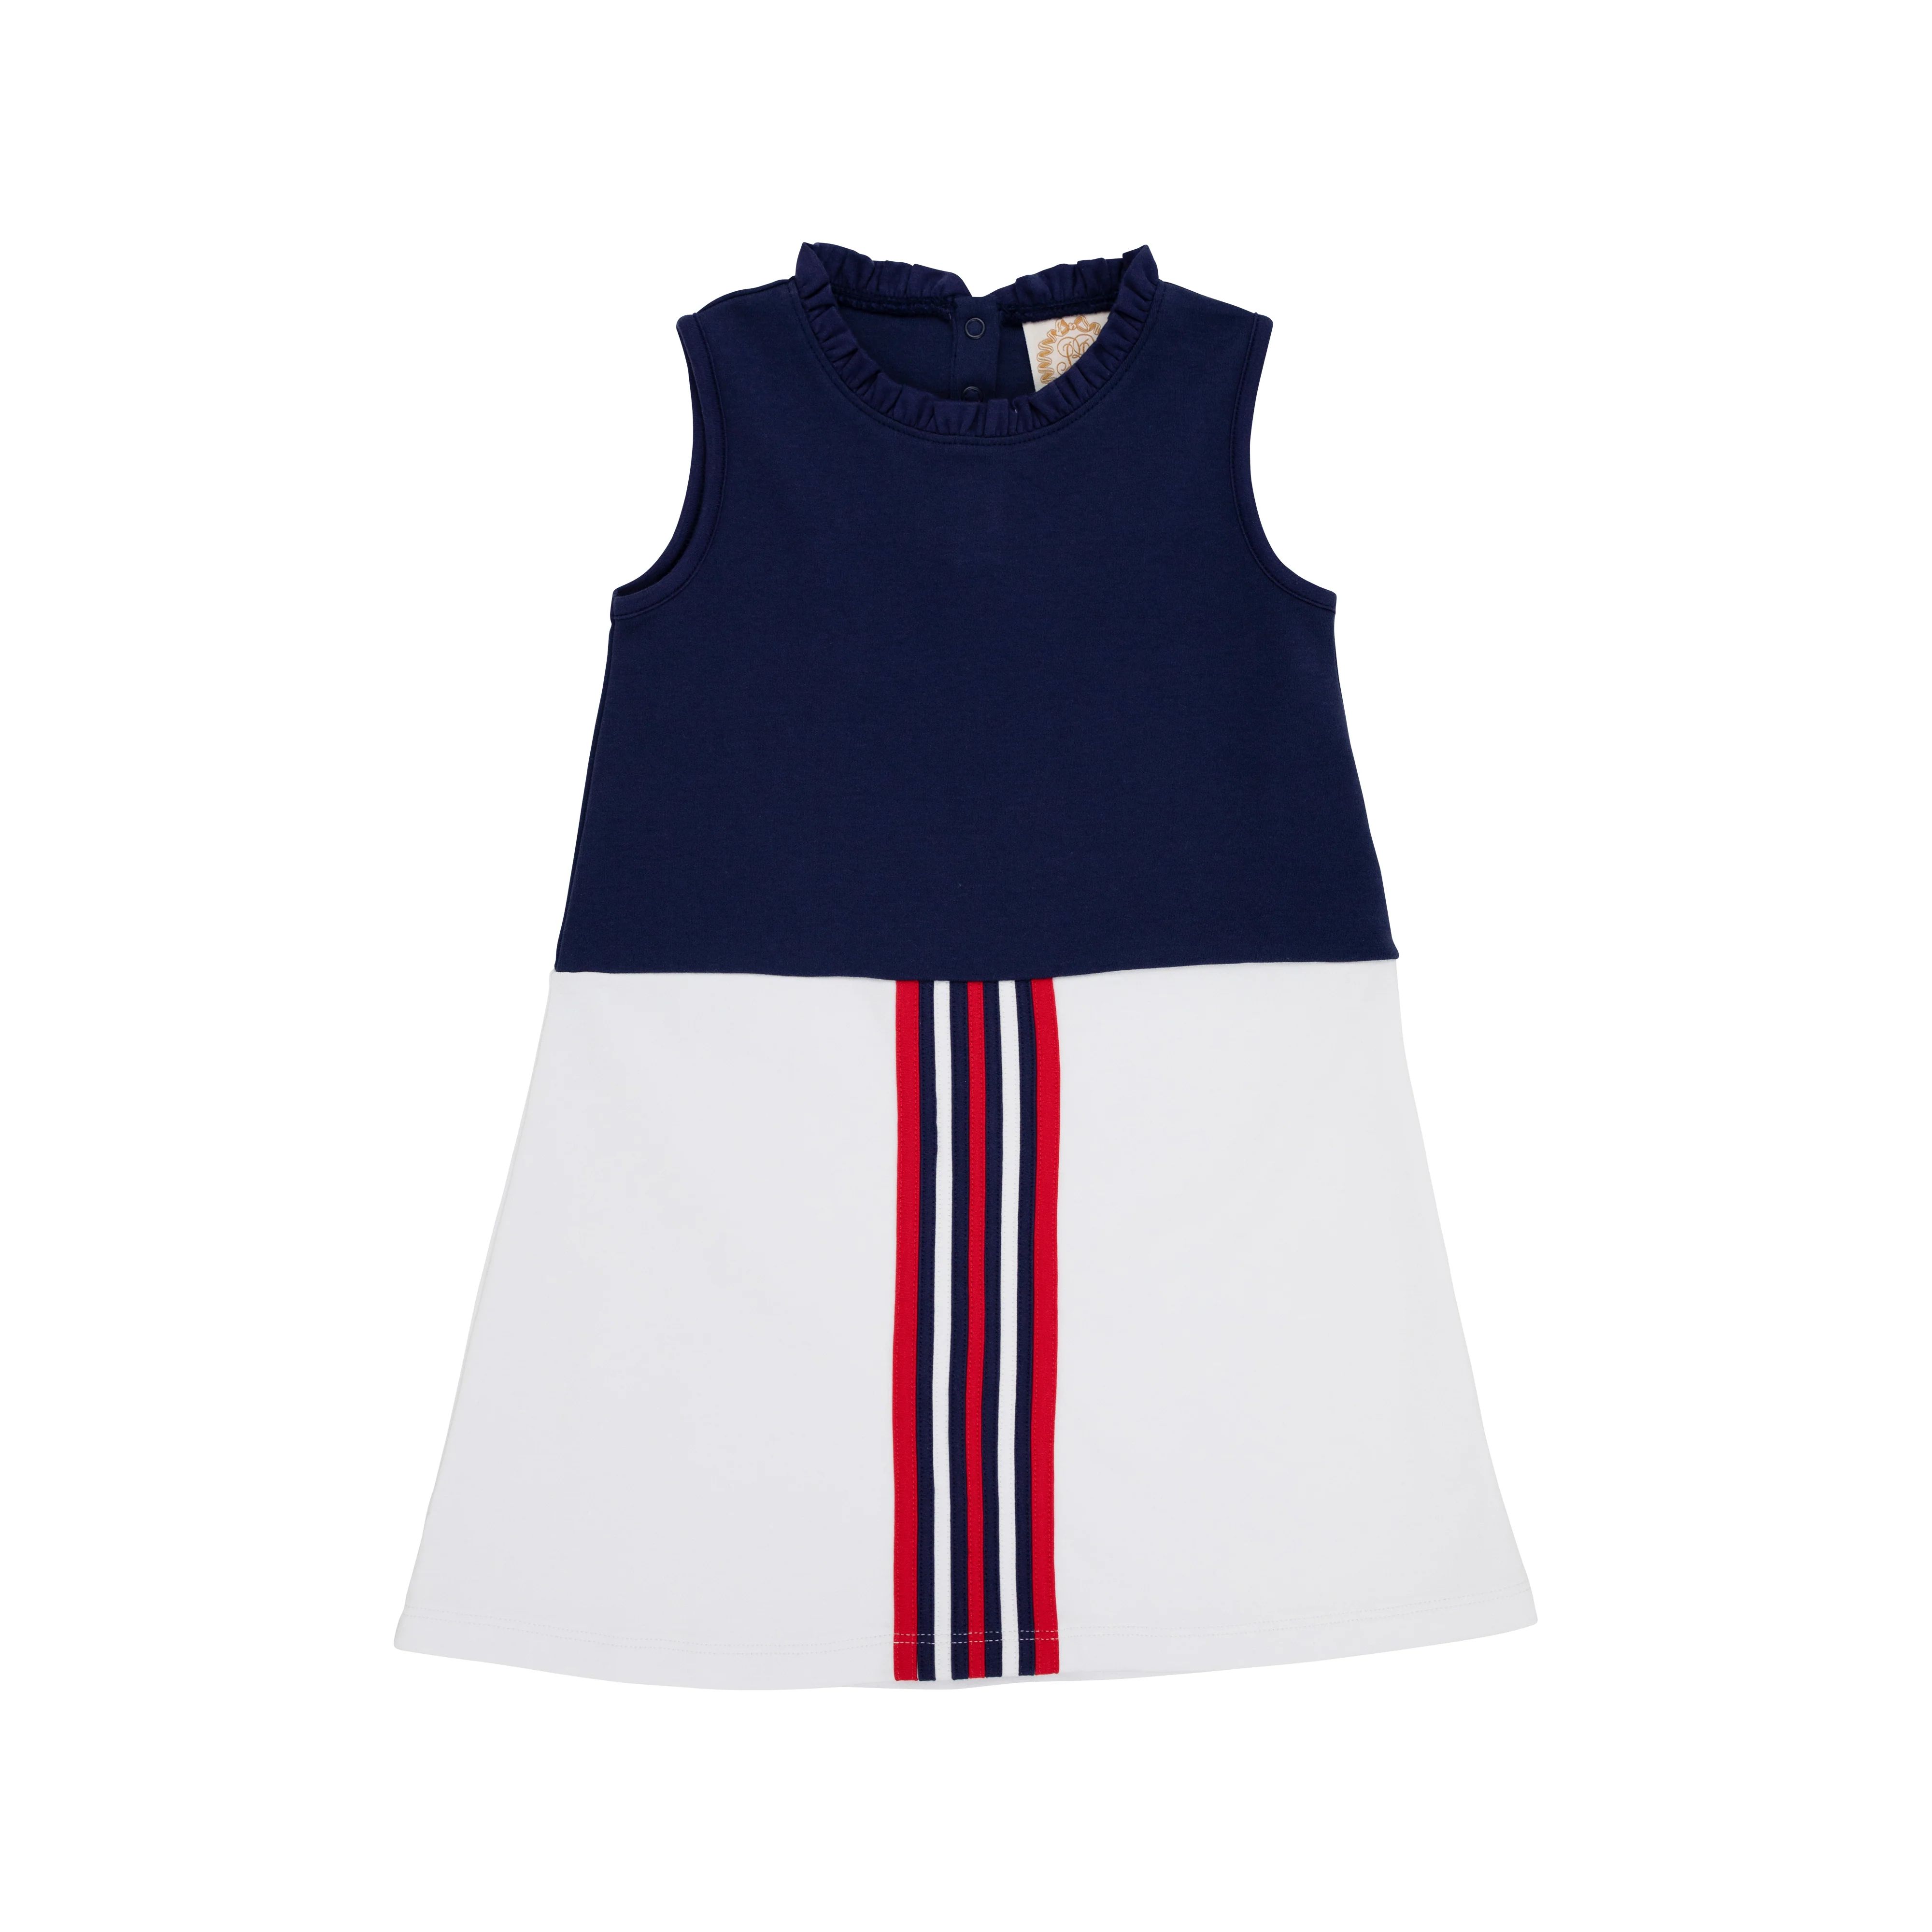 Lizzie's Luxe Leisure Dress - Nantucket Navy with Richmond Red and Worth Avenue White | The Beaufort Bonnet Company